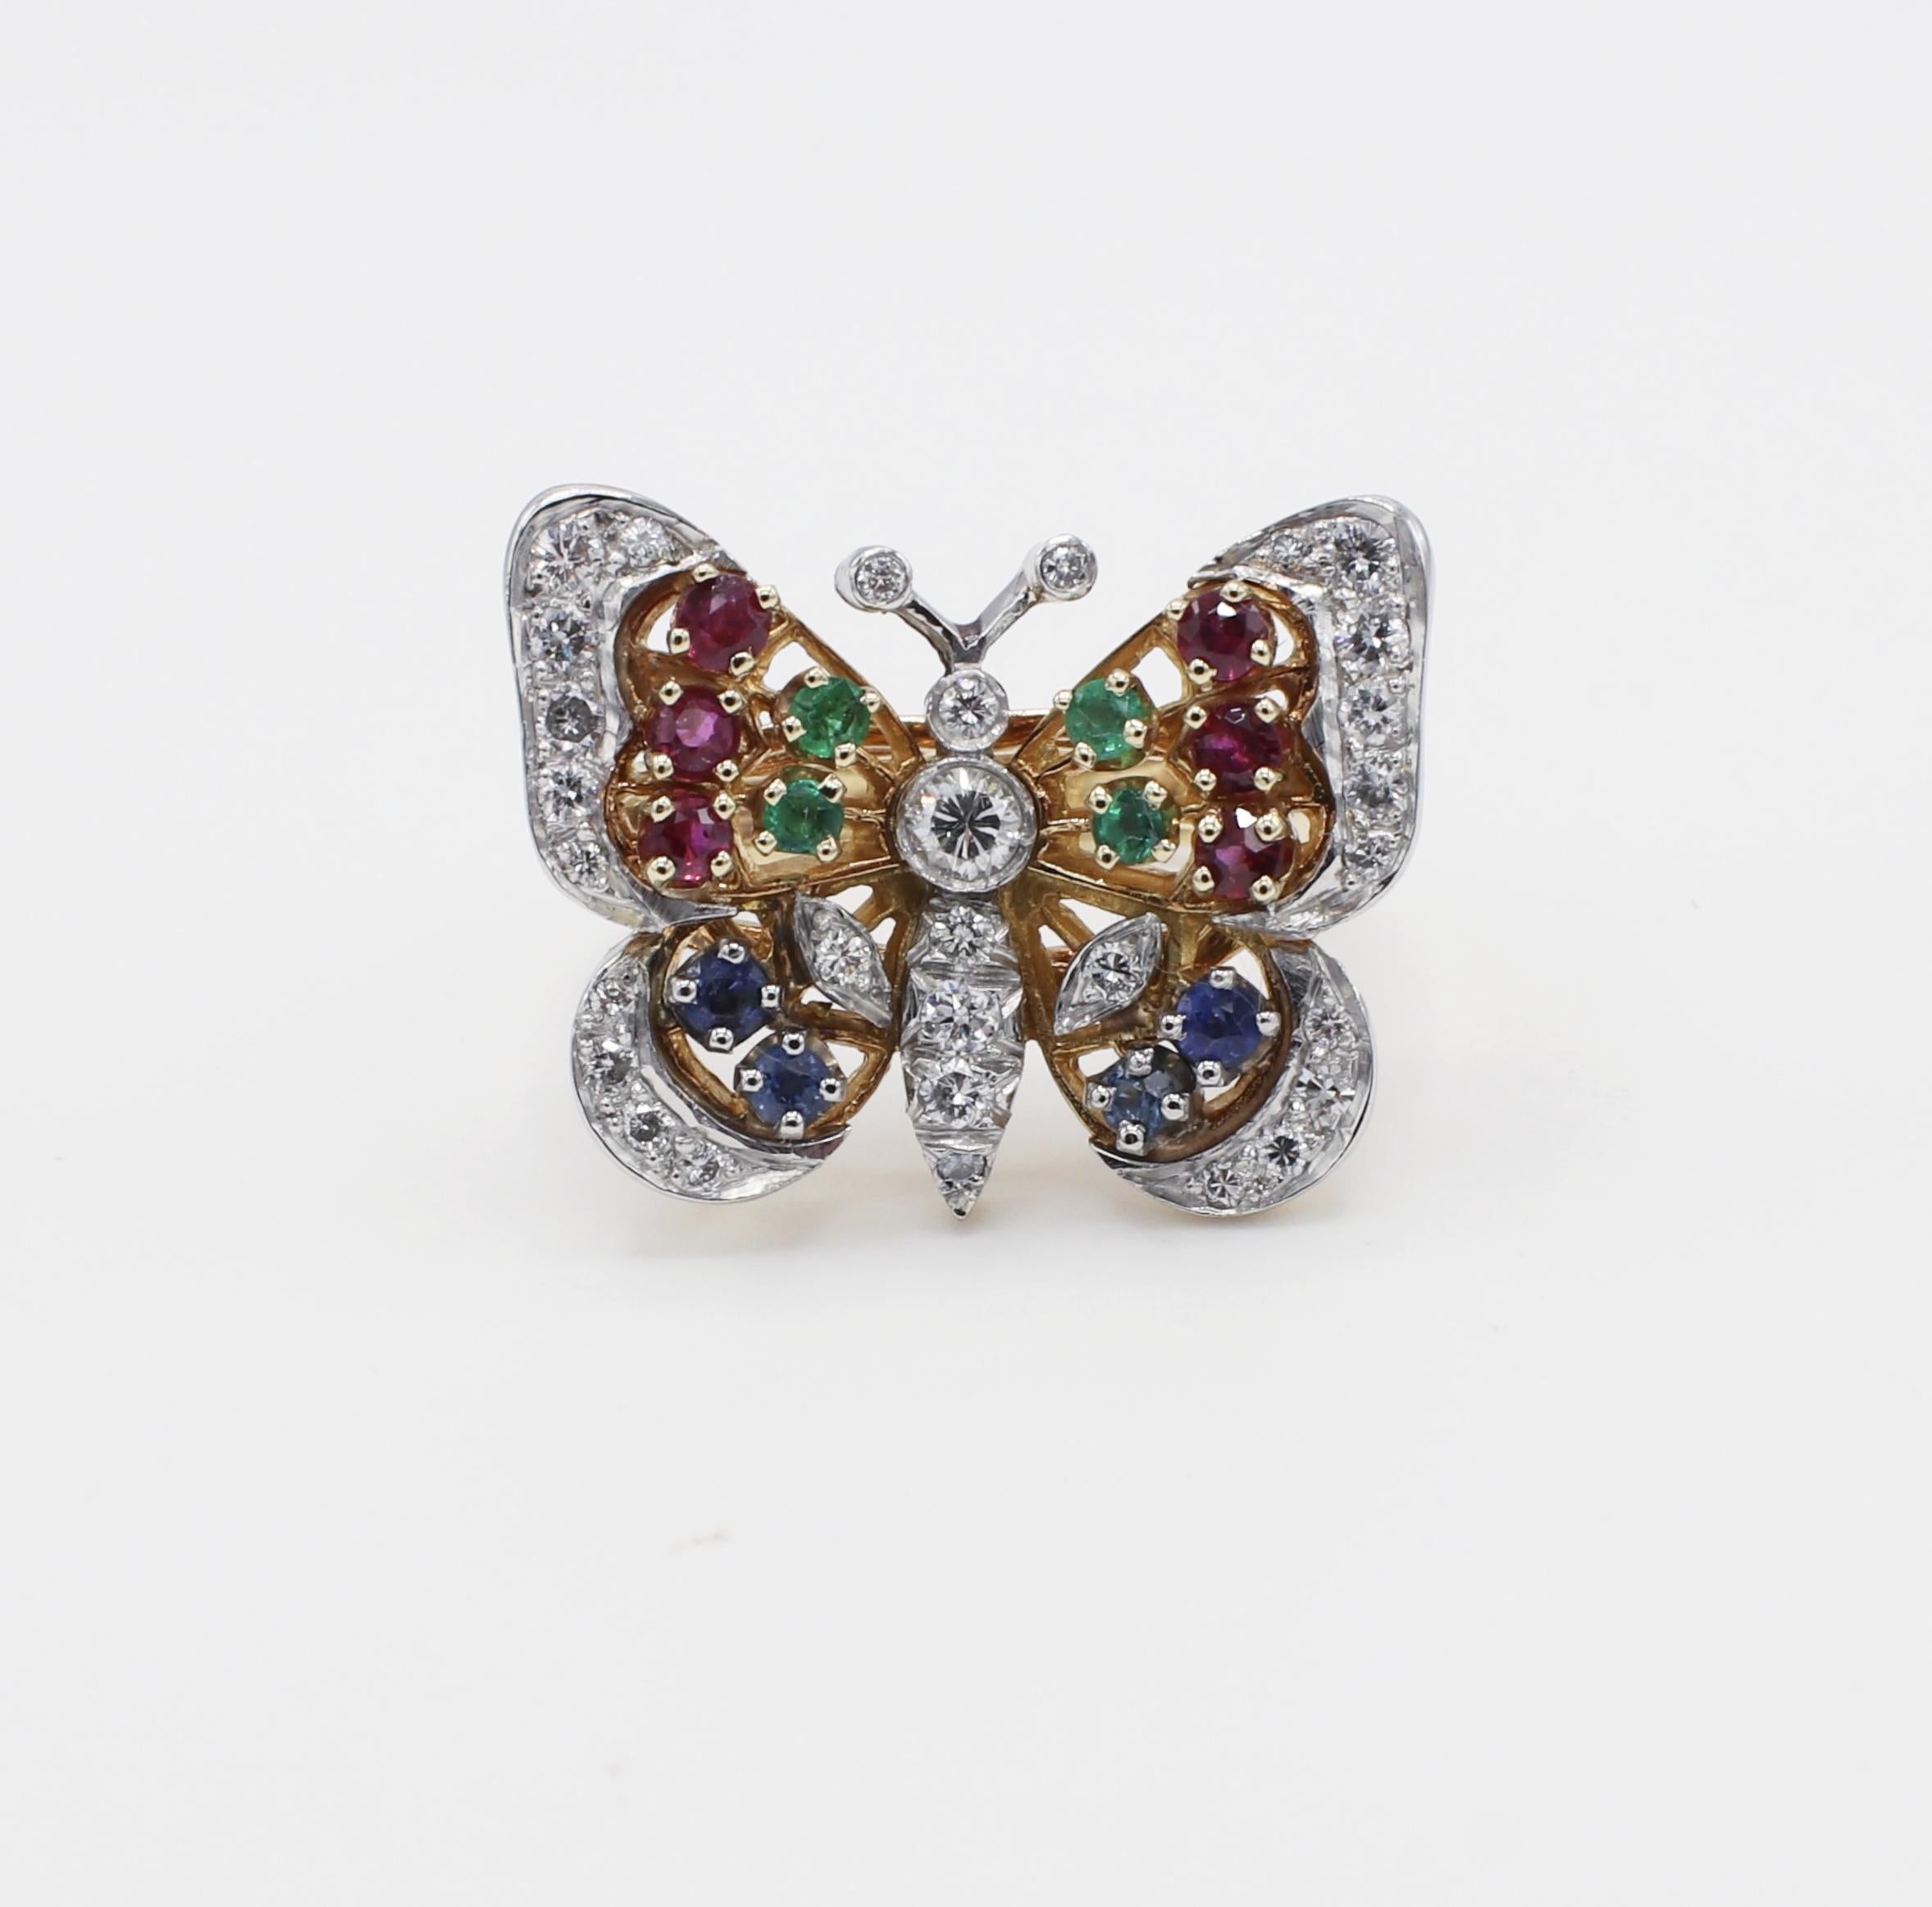 18K Yellow Gold Diamond, Ruby, Sapphire & Emerald Butterfly Cocktail Ring Size 6.5
Metal: 18k yellow gold
Weight: 8.60 grams
Diamonds: 31 round brilliant cut diamonds, approx. .60 CTW G-H VS
Top of ring measures 22 x 16.5MM
Size: 6.5 (US)
